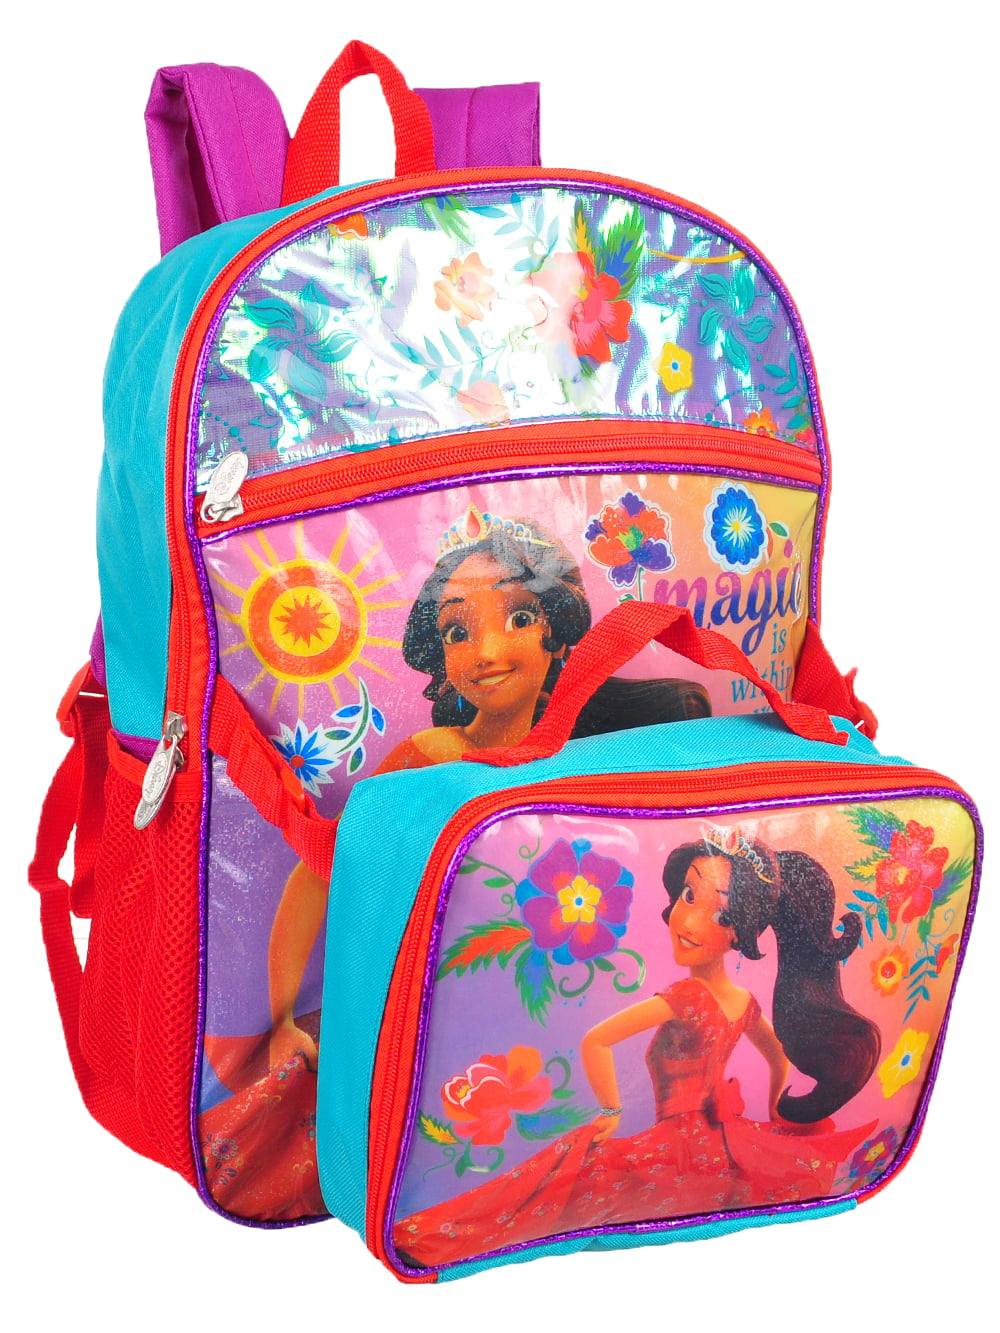 Disney Princess Elena of Avalor Large Backpack 15" with Pencil Case New 